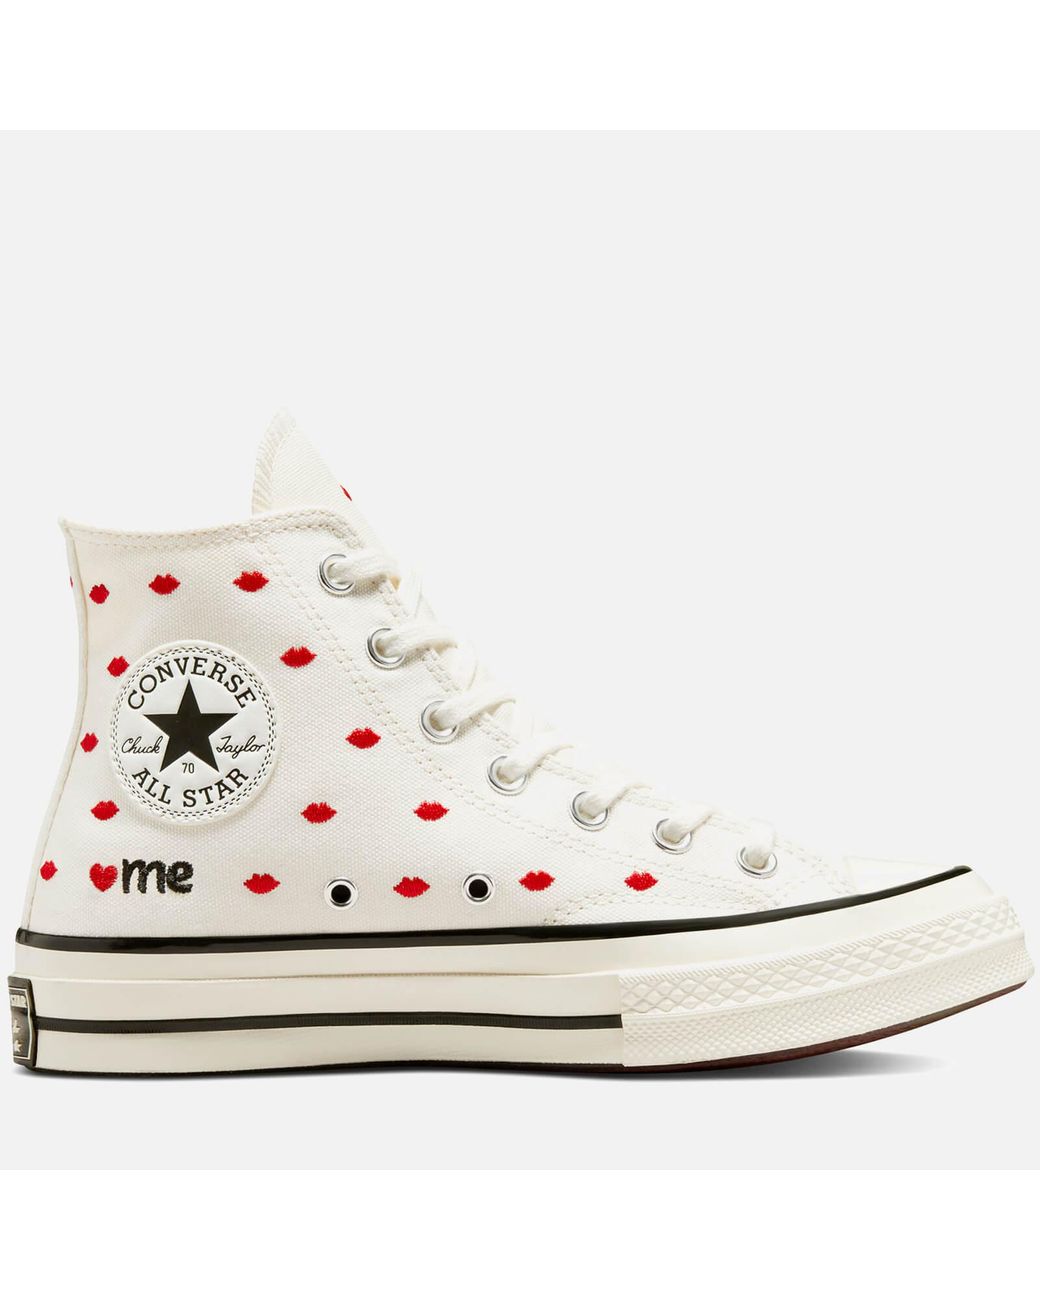 Converse Chuck 70 Crafted With Love Hi-top Trainers in White | Lyst UK